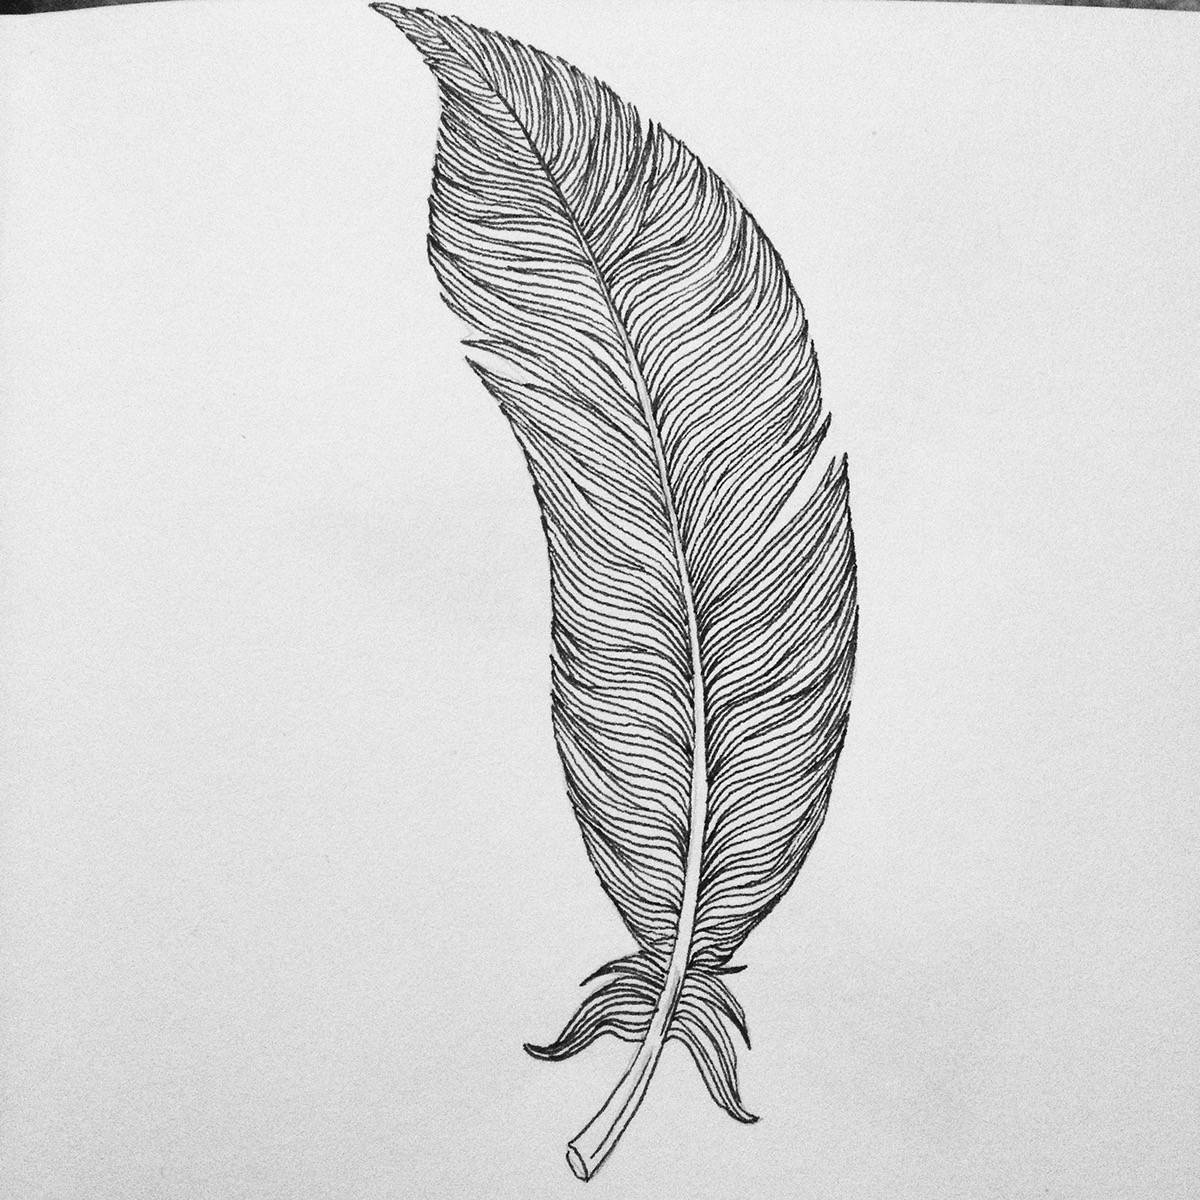 feder feather linedrawing lines clean canvas blackandwhite penandink ink tatoo tattoo wallart decoration walldecoration design